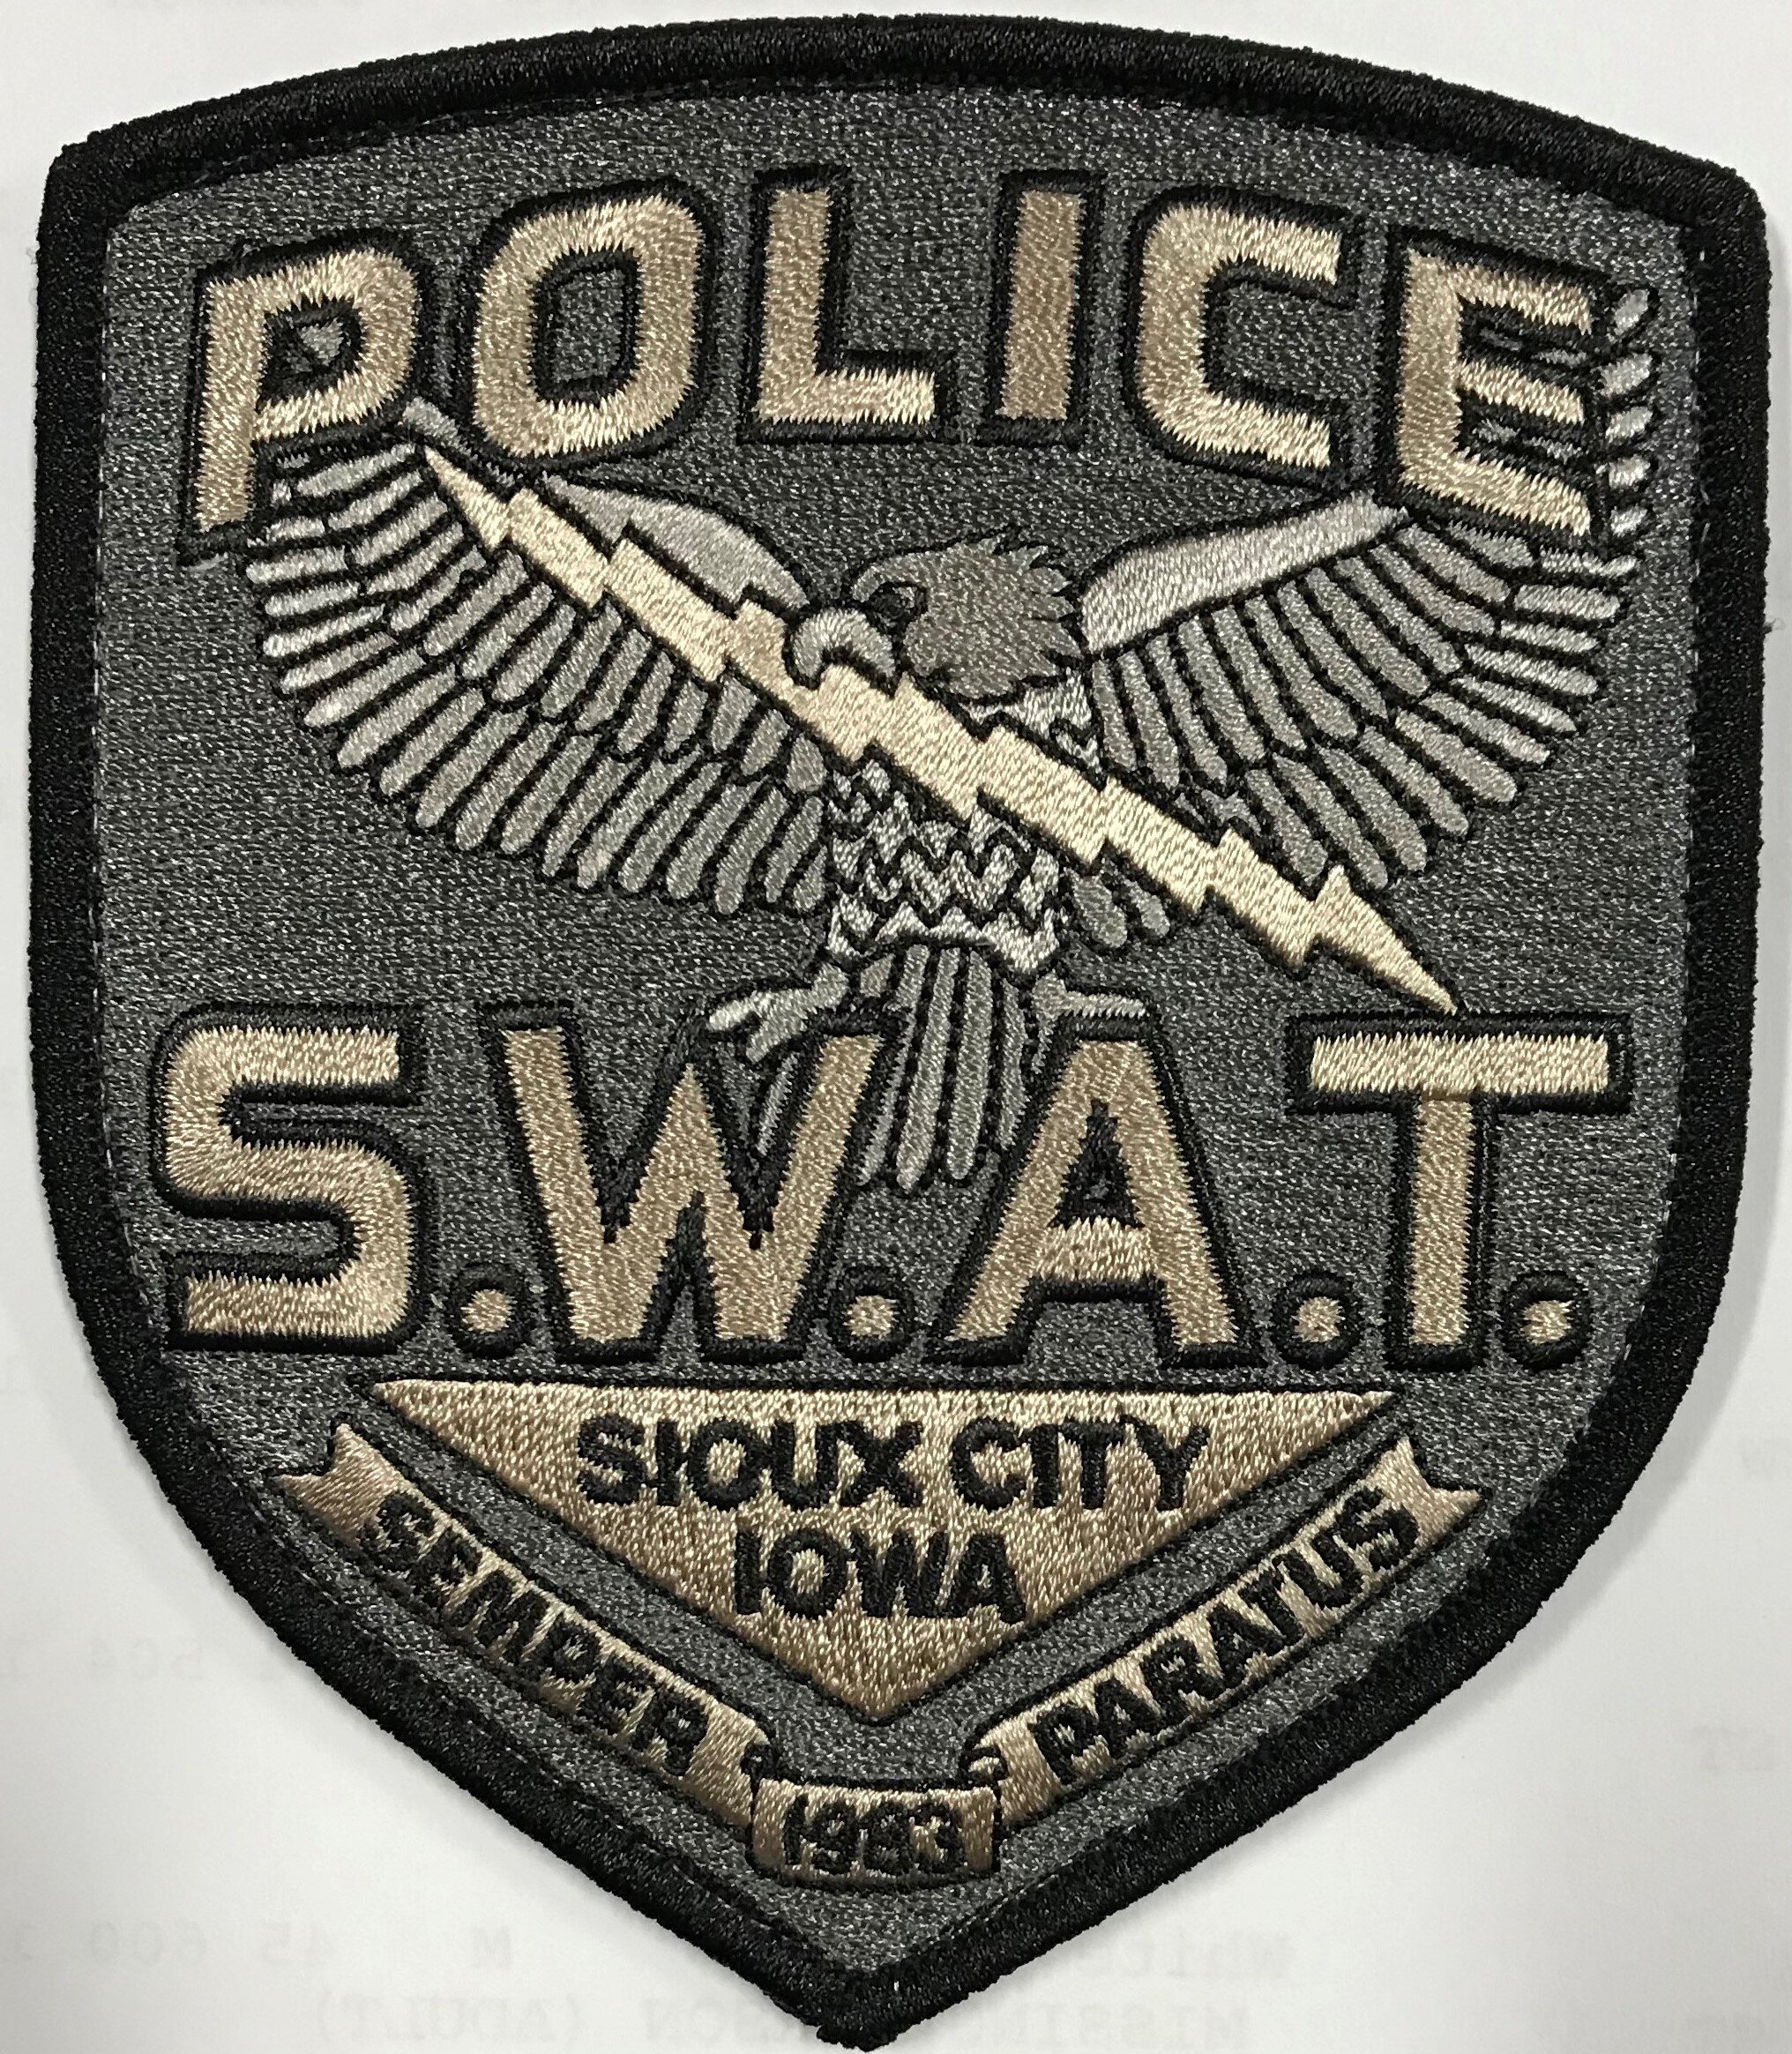 Swat Sioux City Police Department